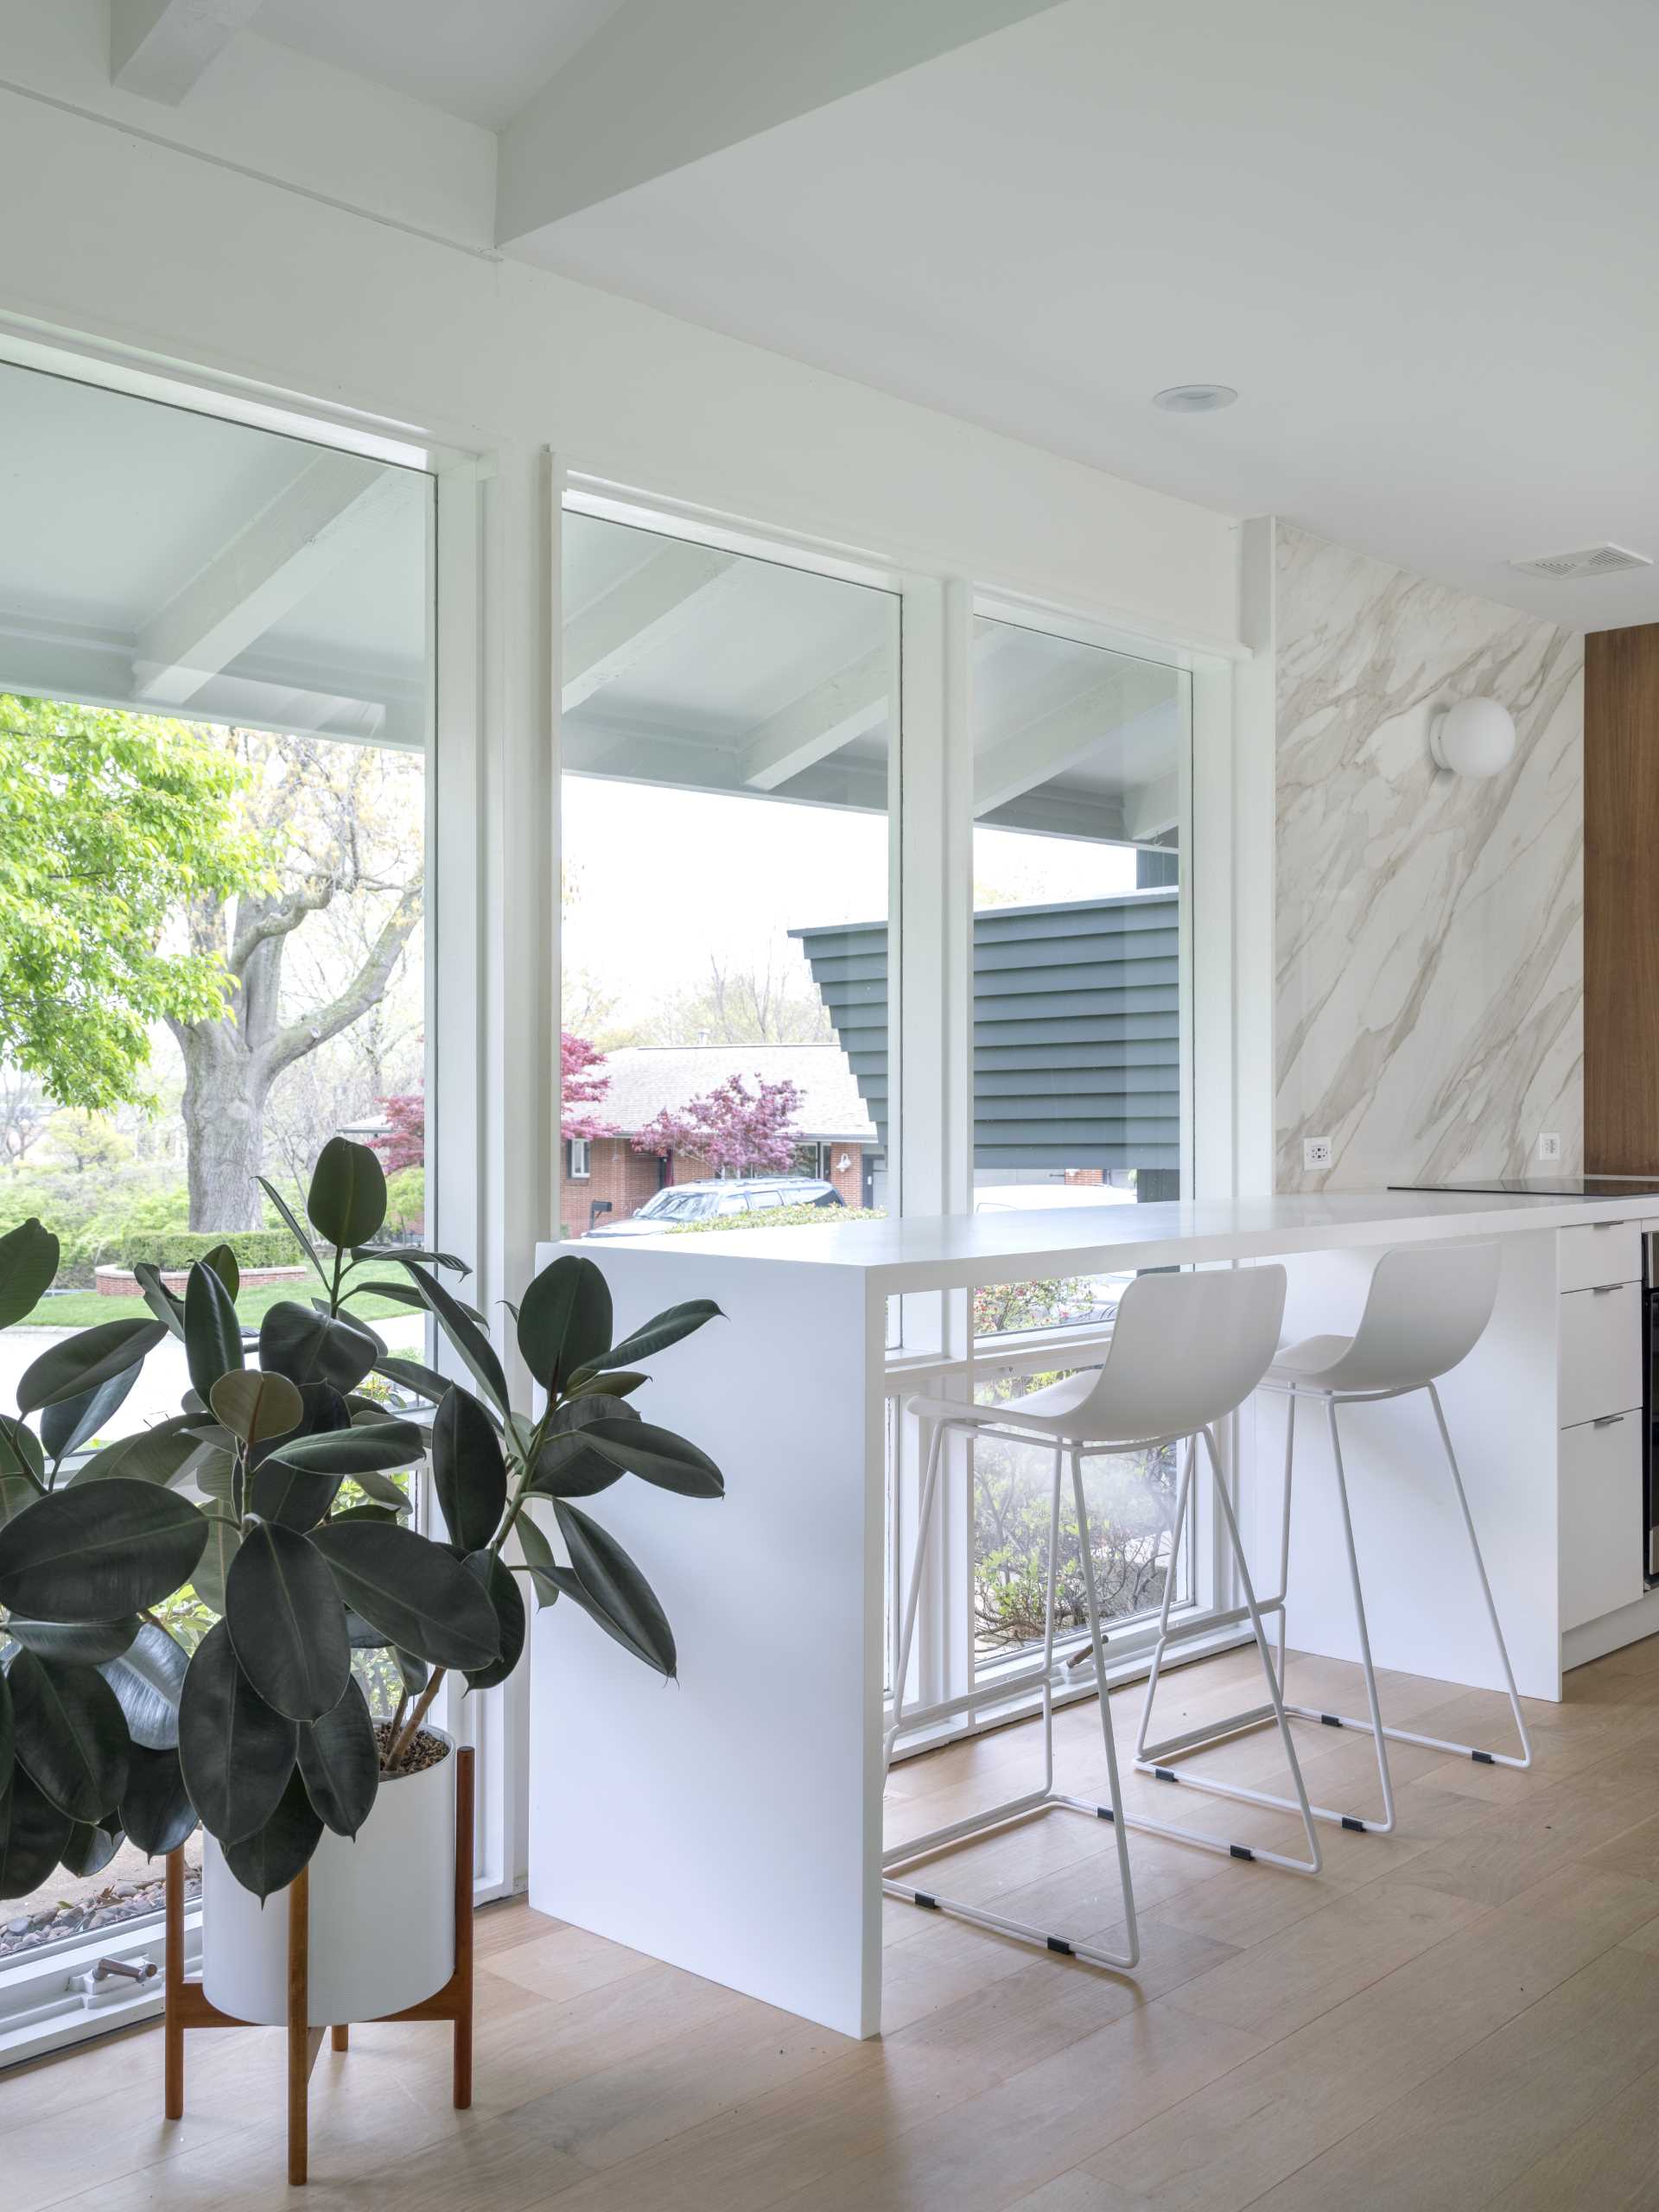 The new kitchen of this renovated mid-century modern home, is bright and open with long white countertops, wood cabinets, and a seating area by the windows.